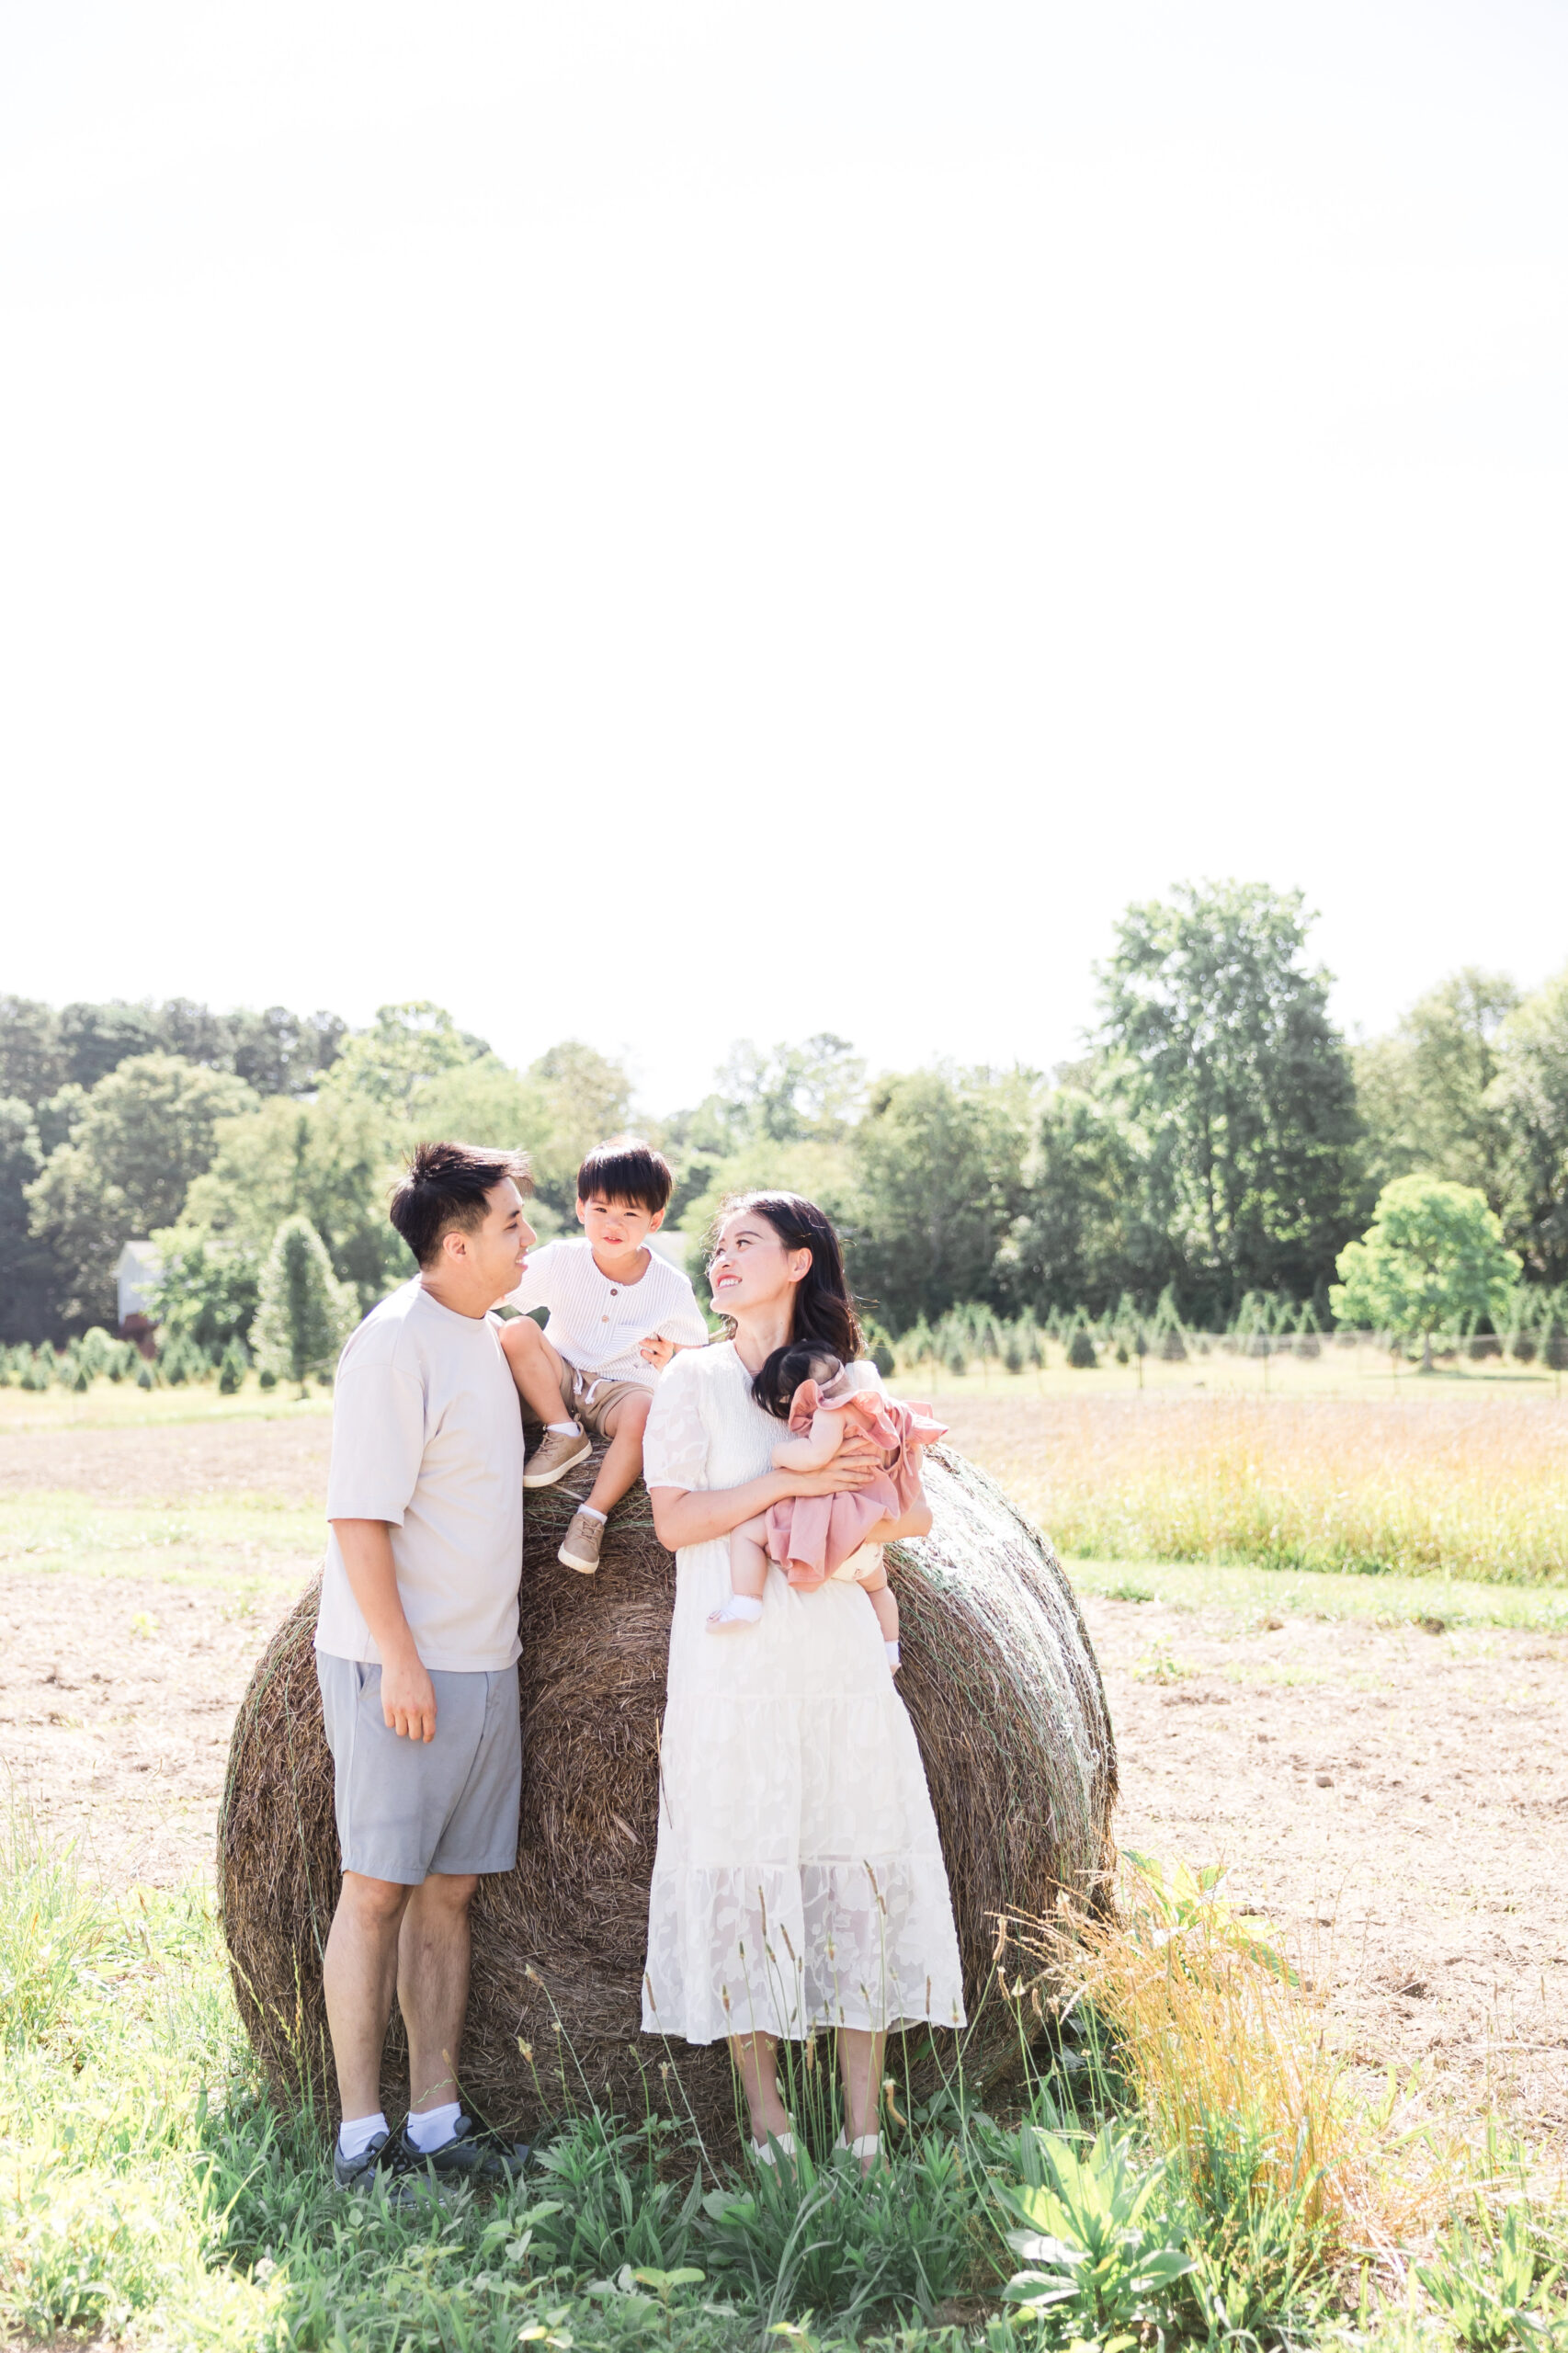 Family session with parents looking at son at open field